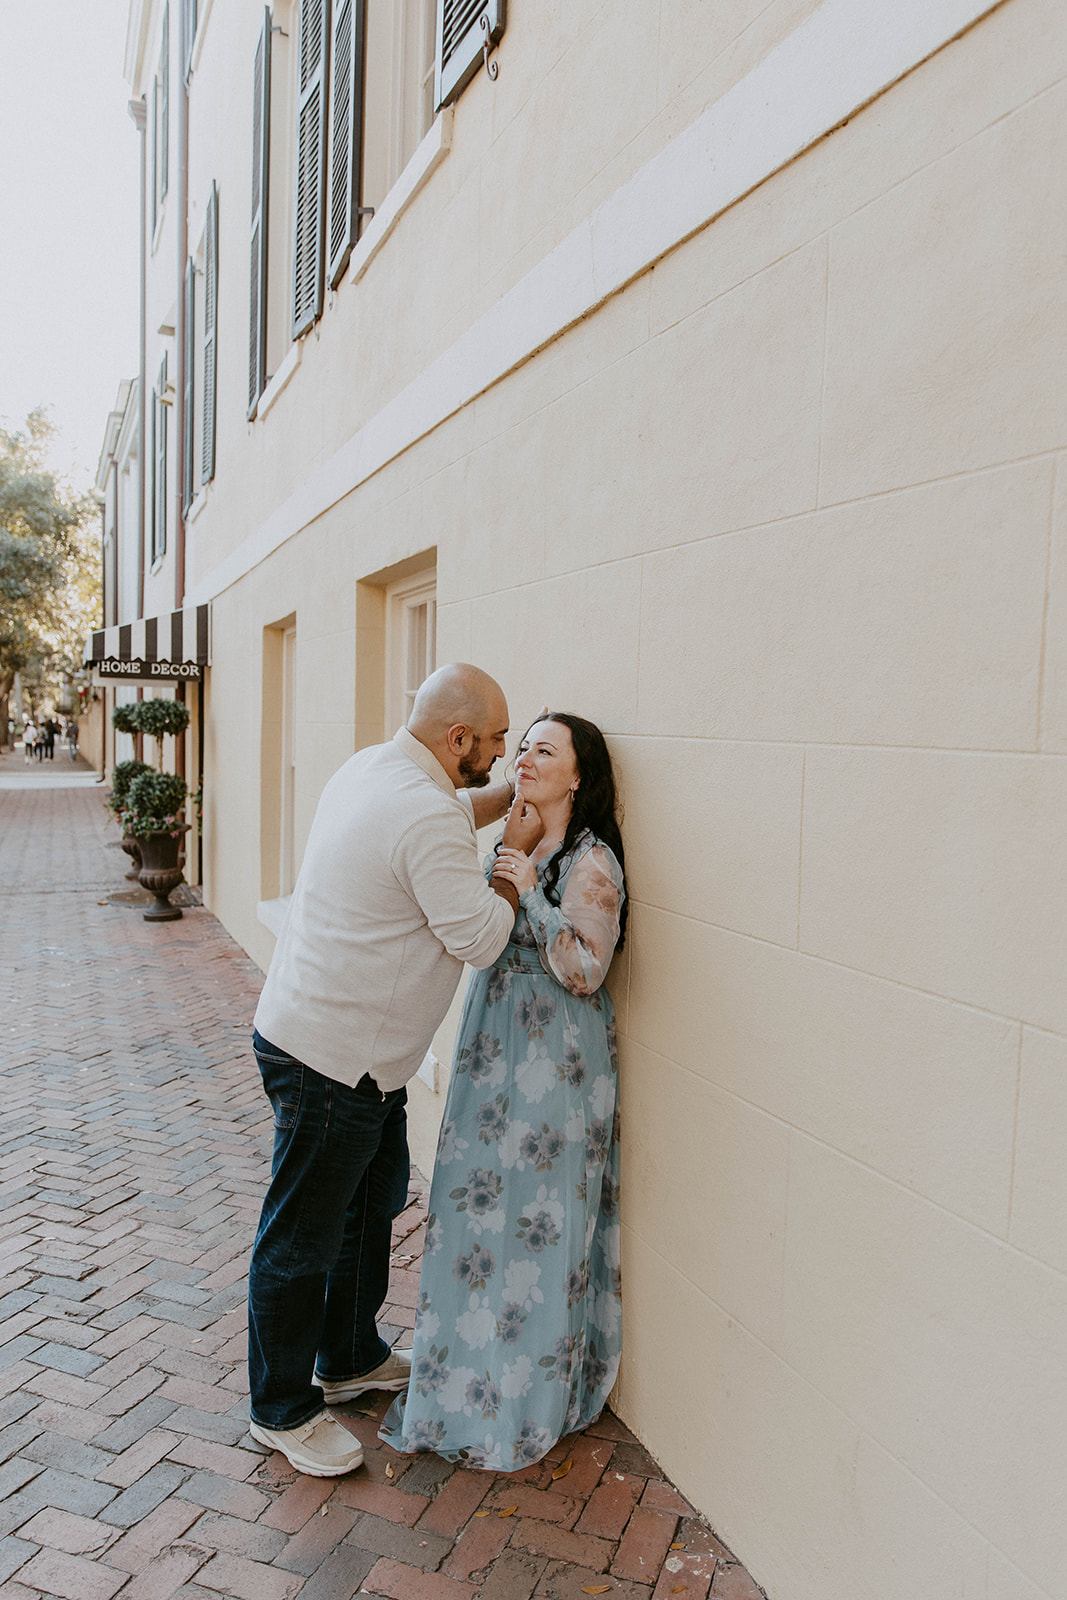 A man and a woman with long dark hair outdoors in a garden-like setting. Both have their eyes closed, showing a moment of affection in Downtown Historic district savannah ga